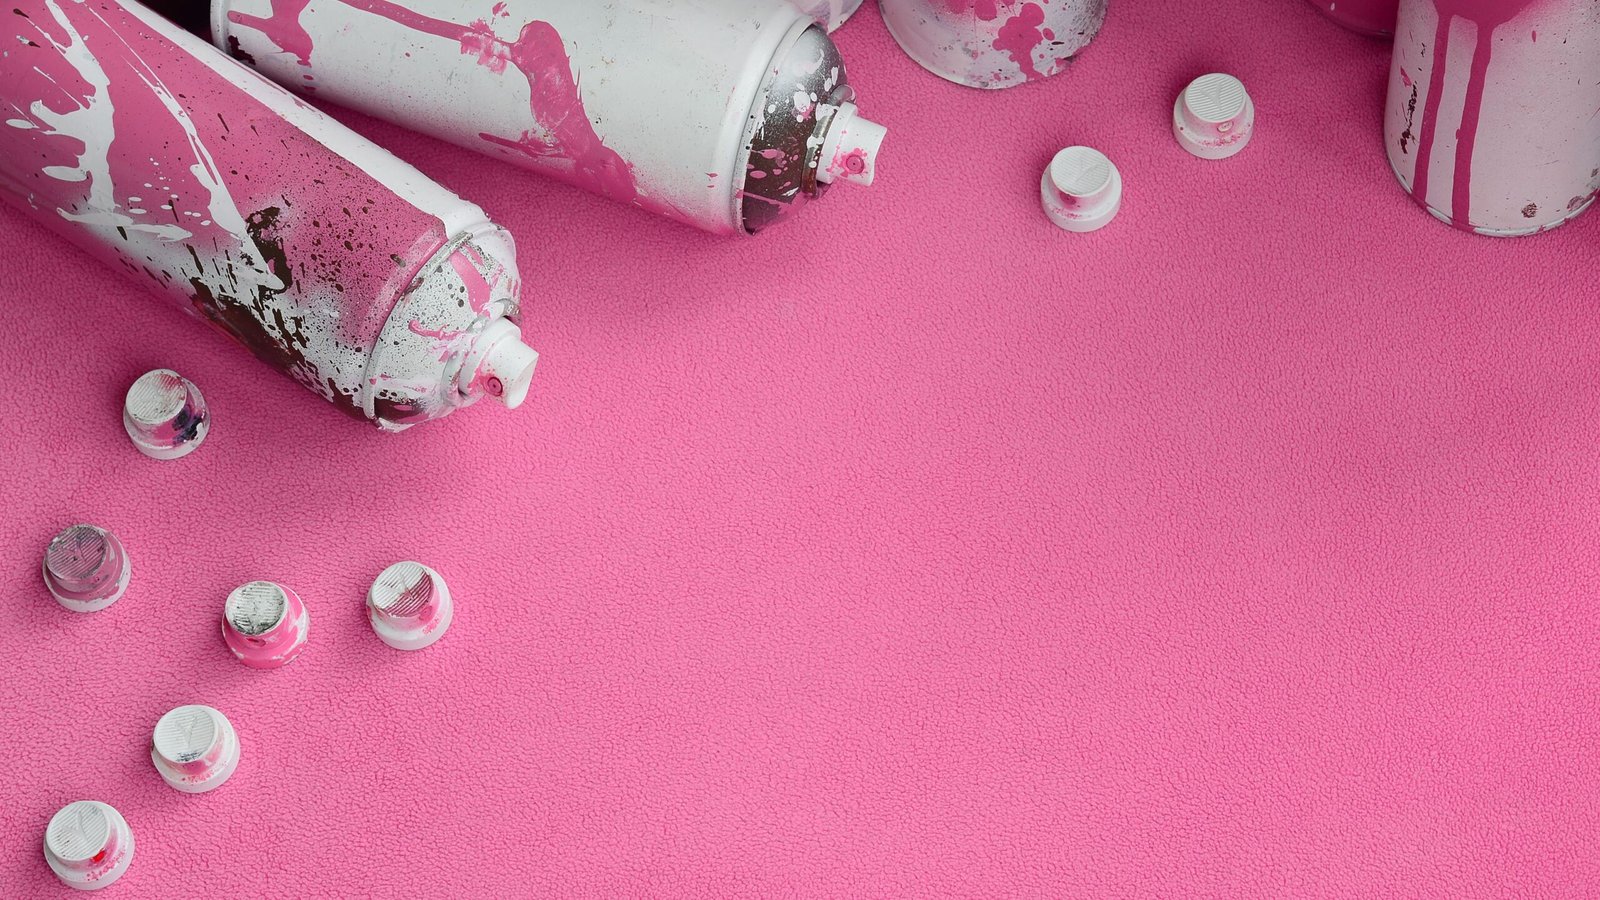 Things you should know to remove spray paints